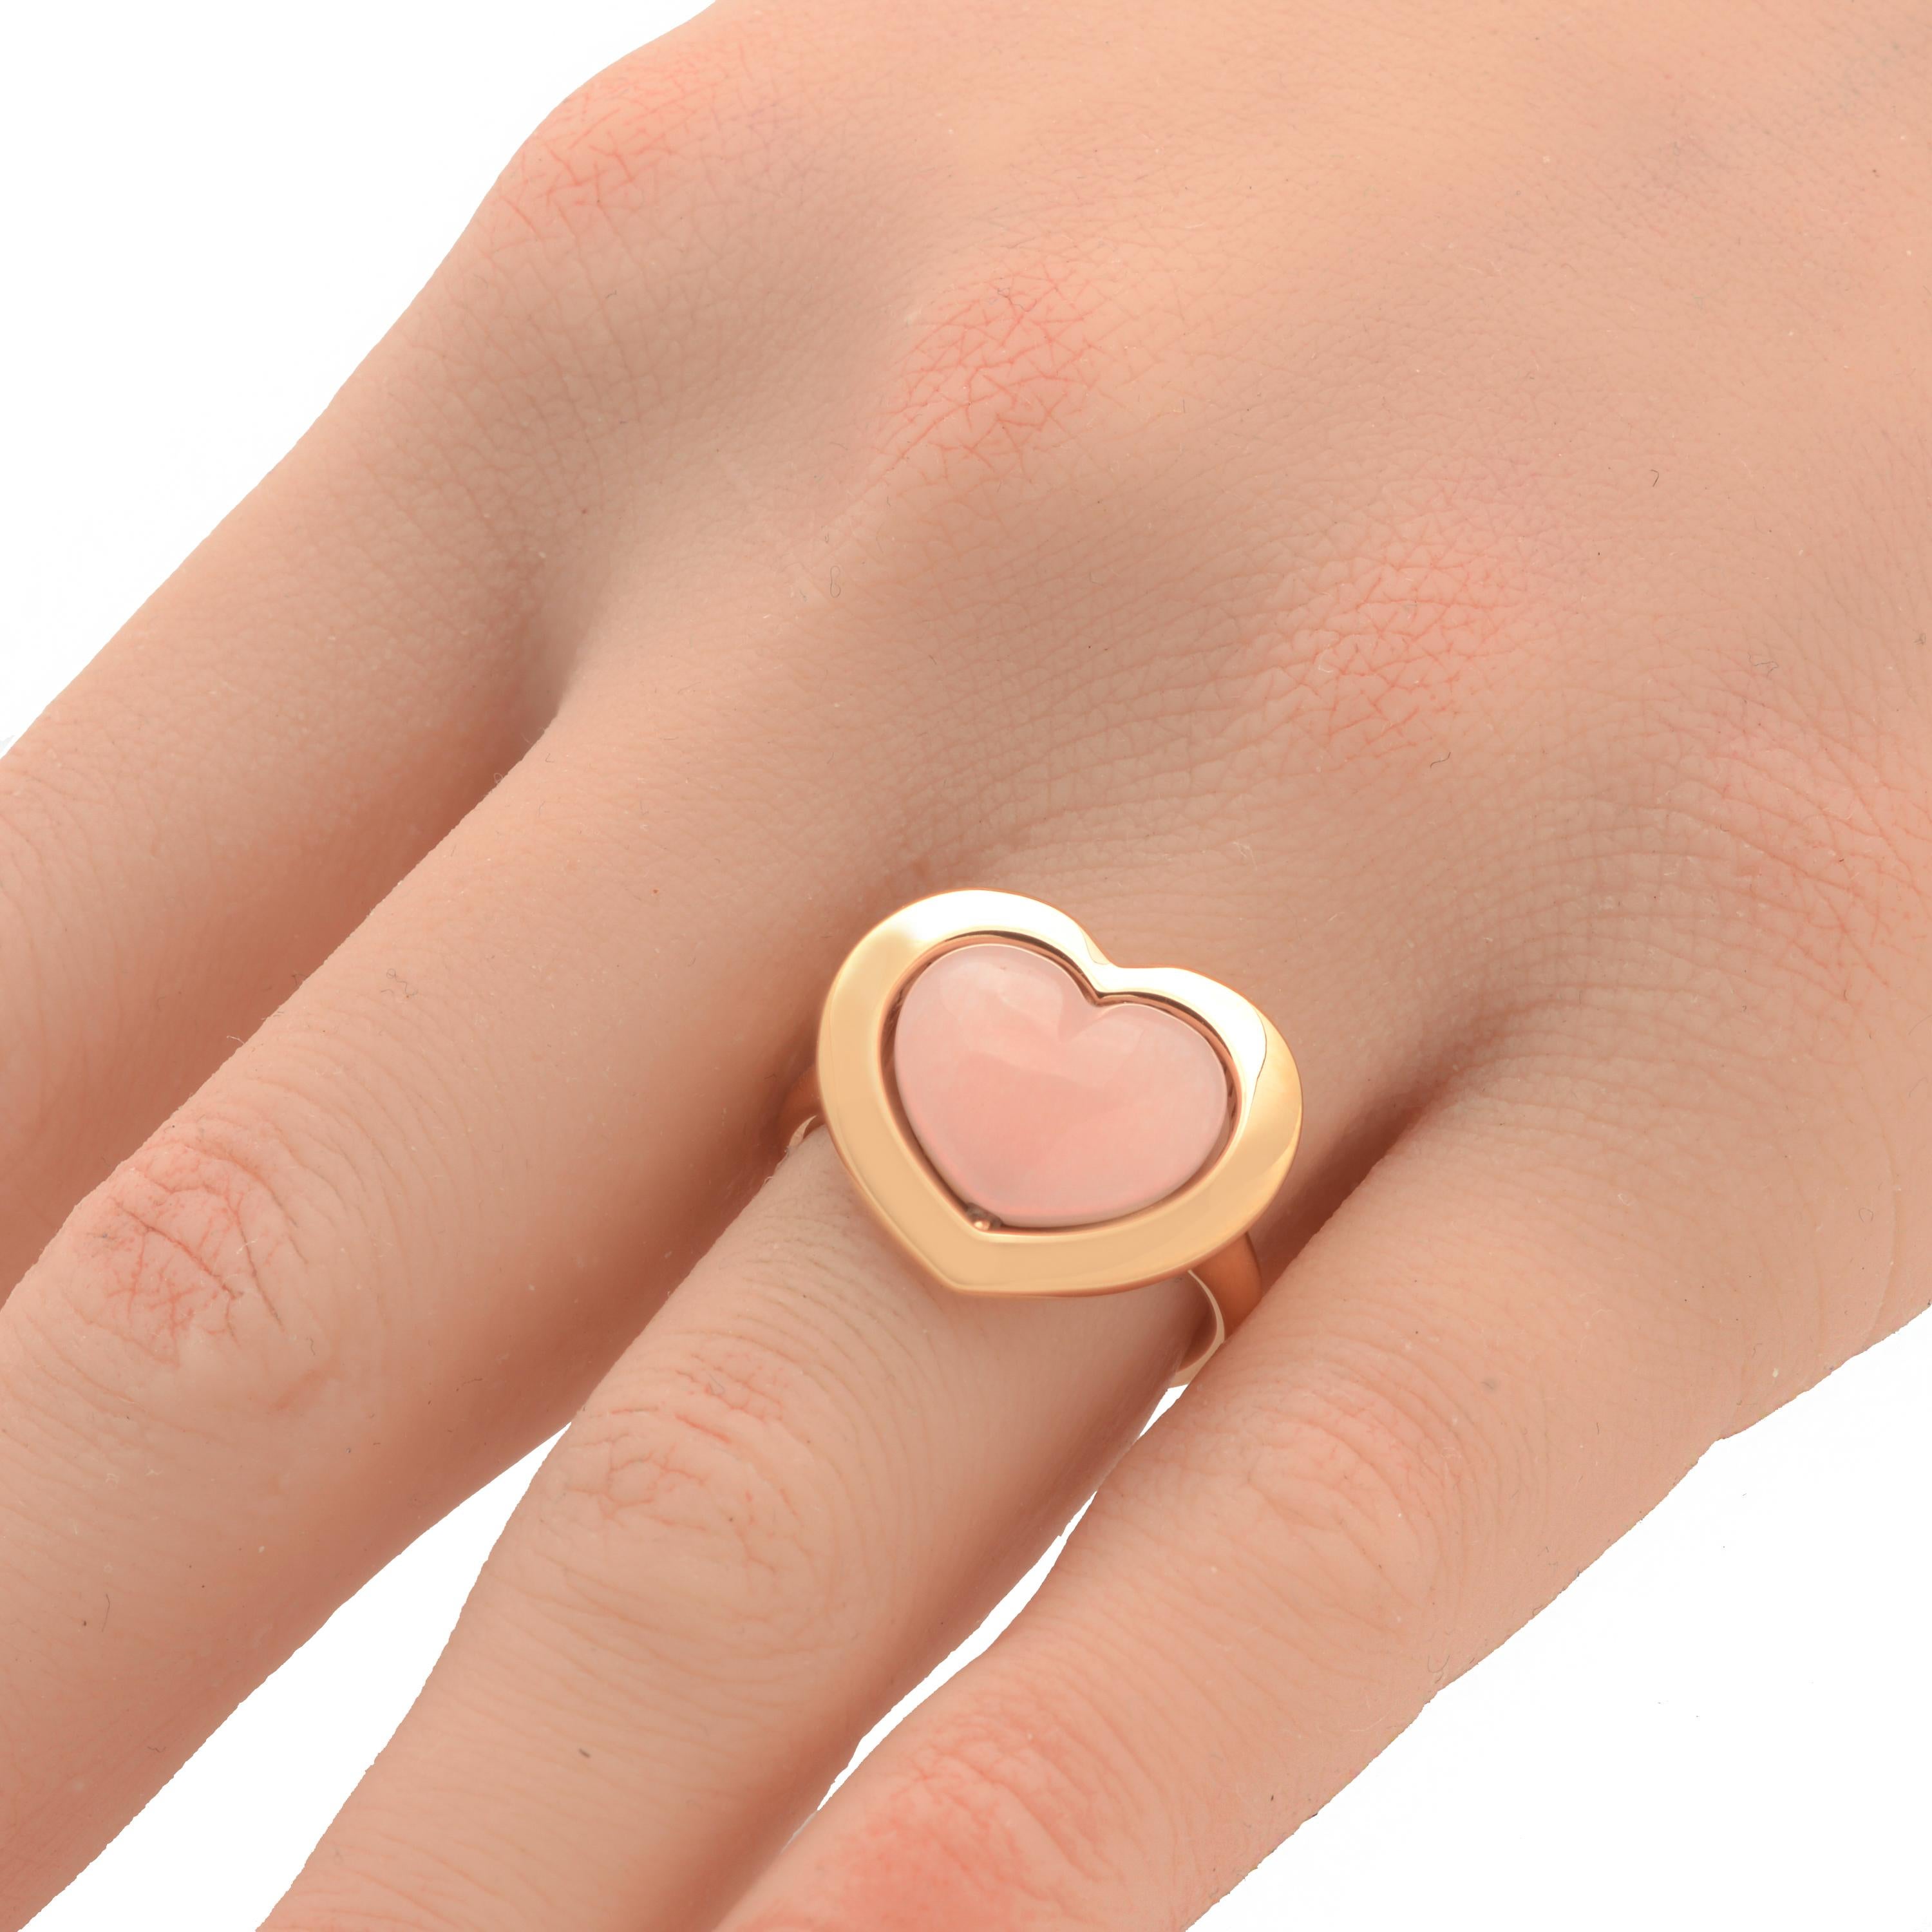 Mimi Milano 18K rose gold cocktail ring features a convex Rose Quartzite heart which can be rotated to reveal a rose gold side that matches a shiny 18K rose gold frame and band. The ring size is 5. The decoration size is 3/4